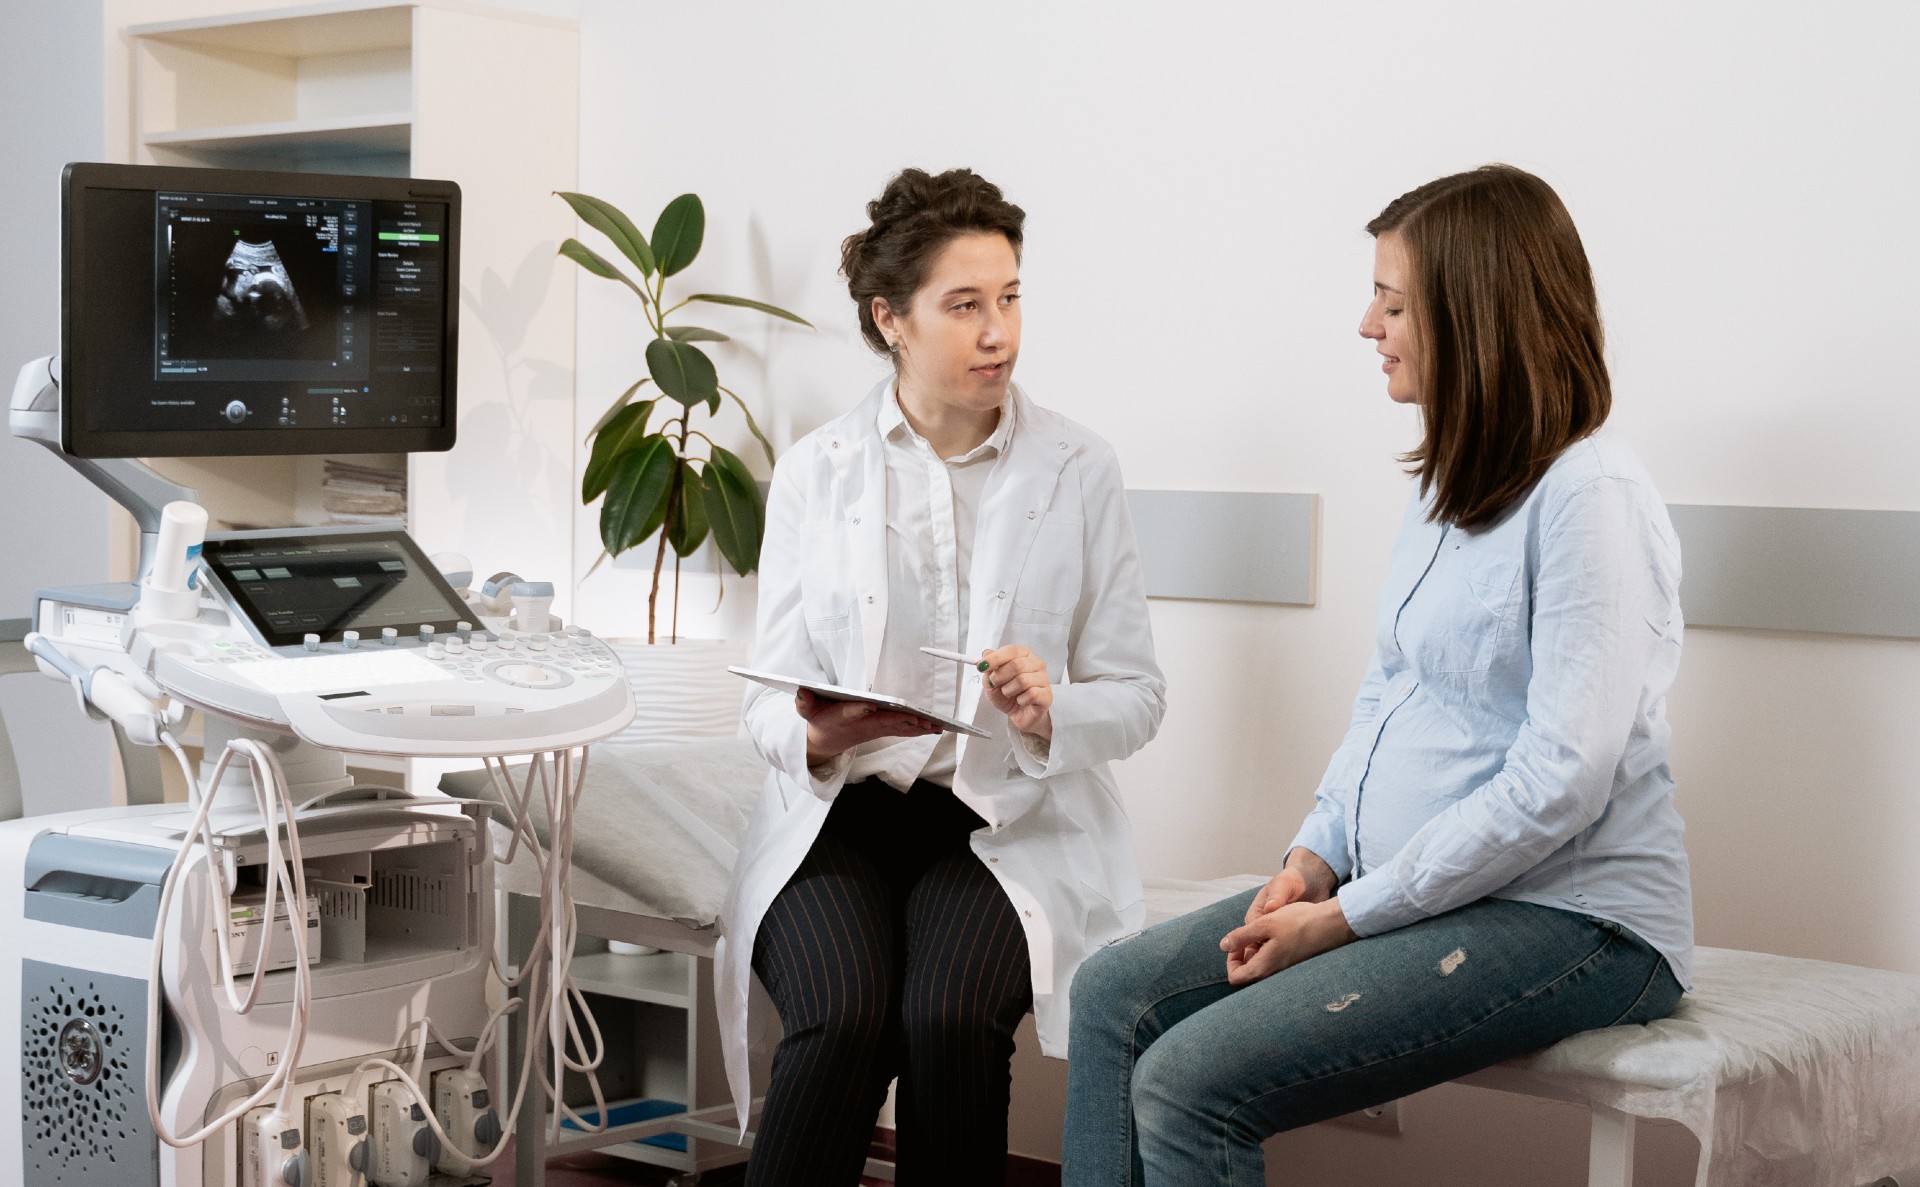 Doctor discusses results with a patient